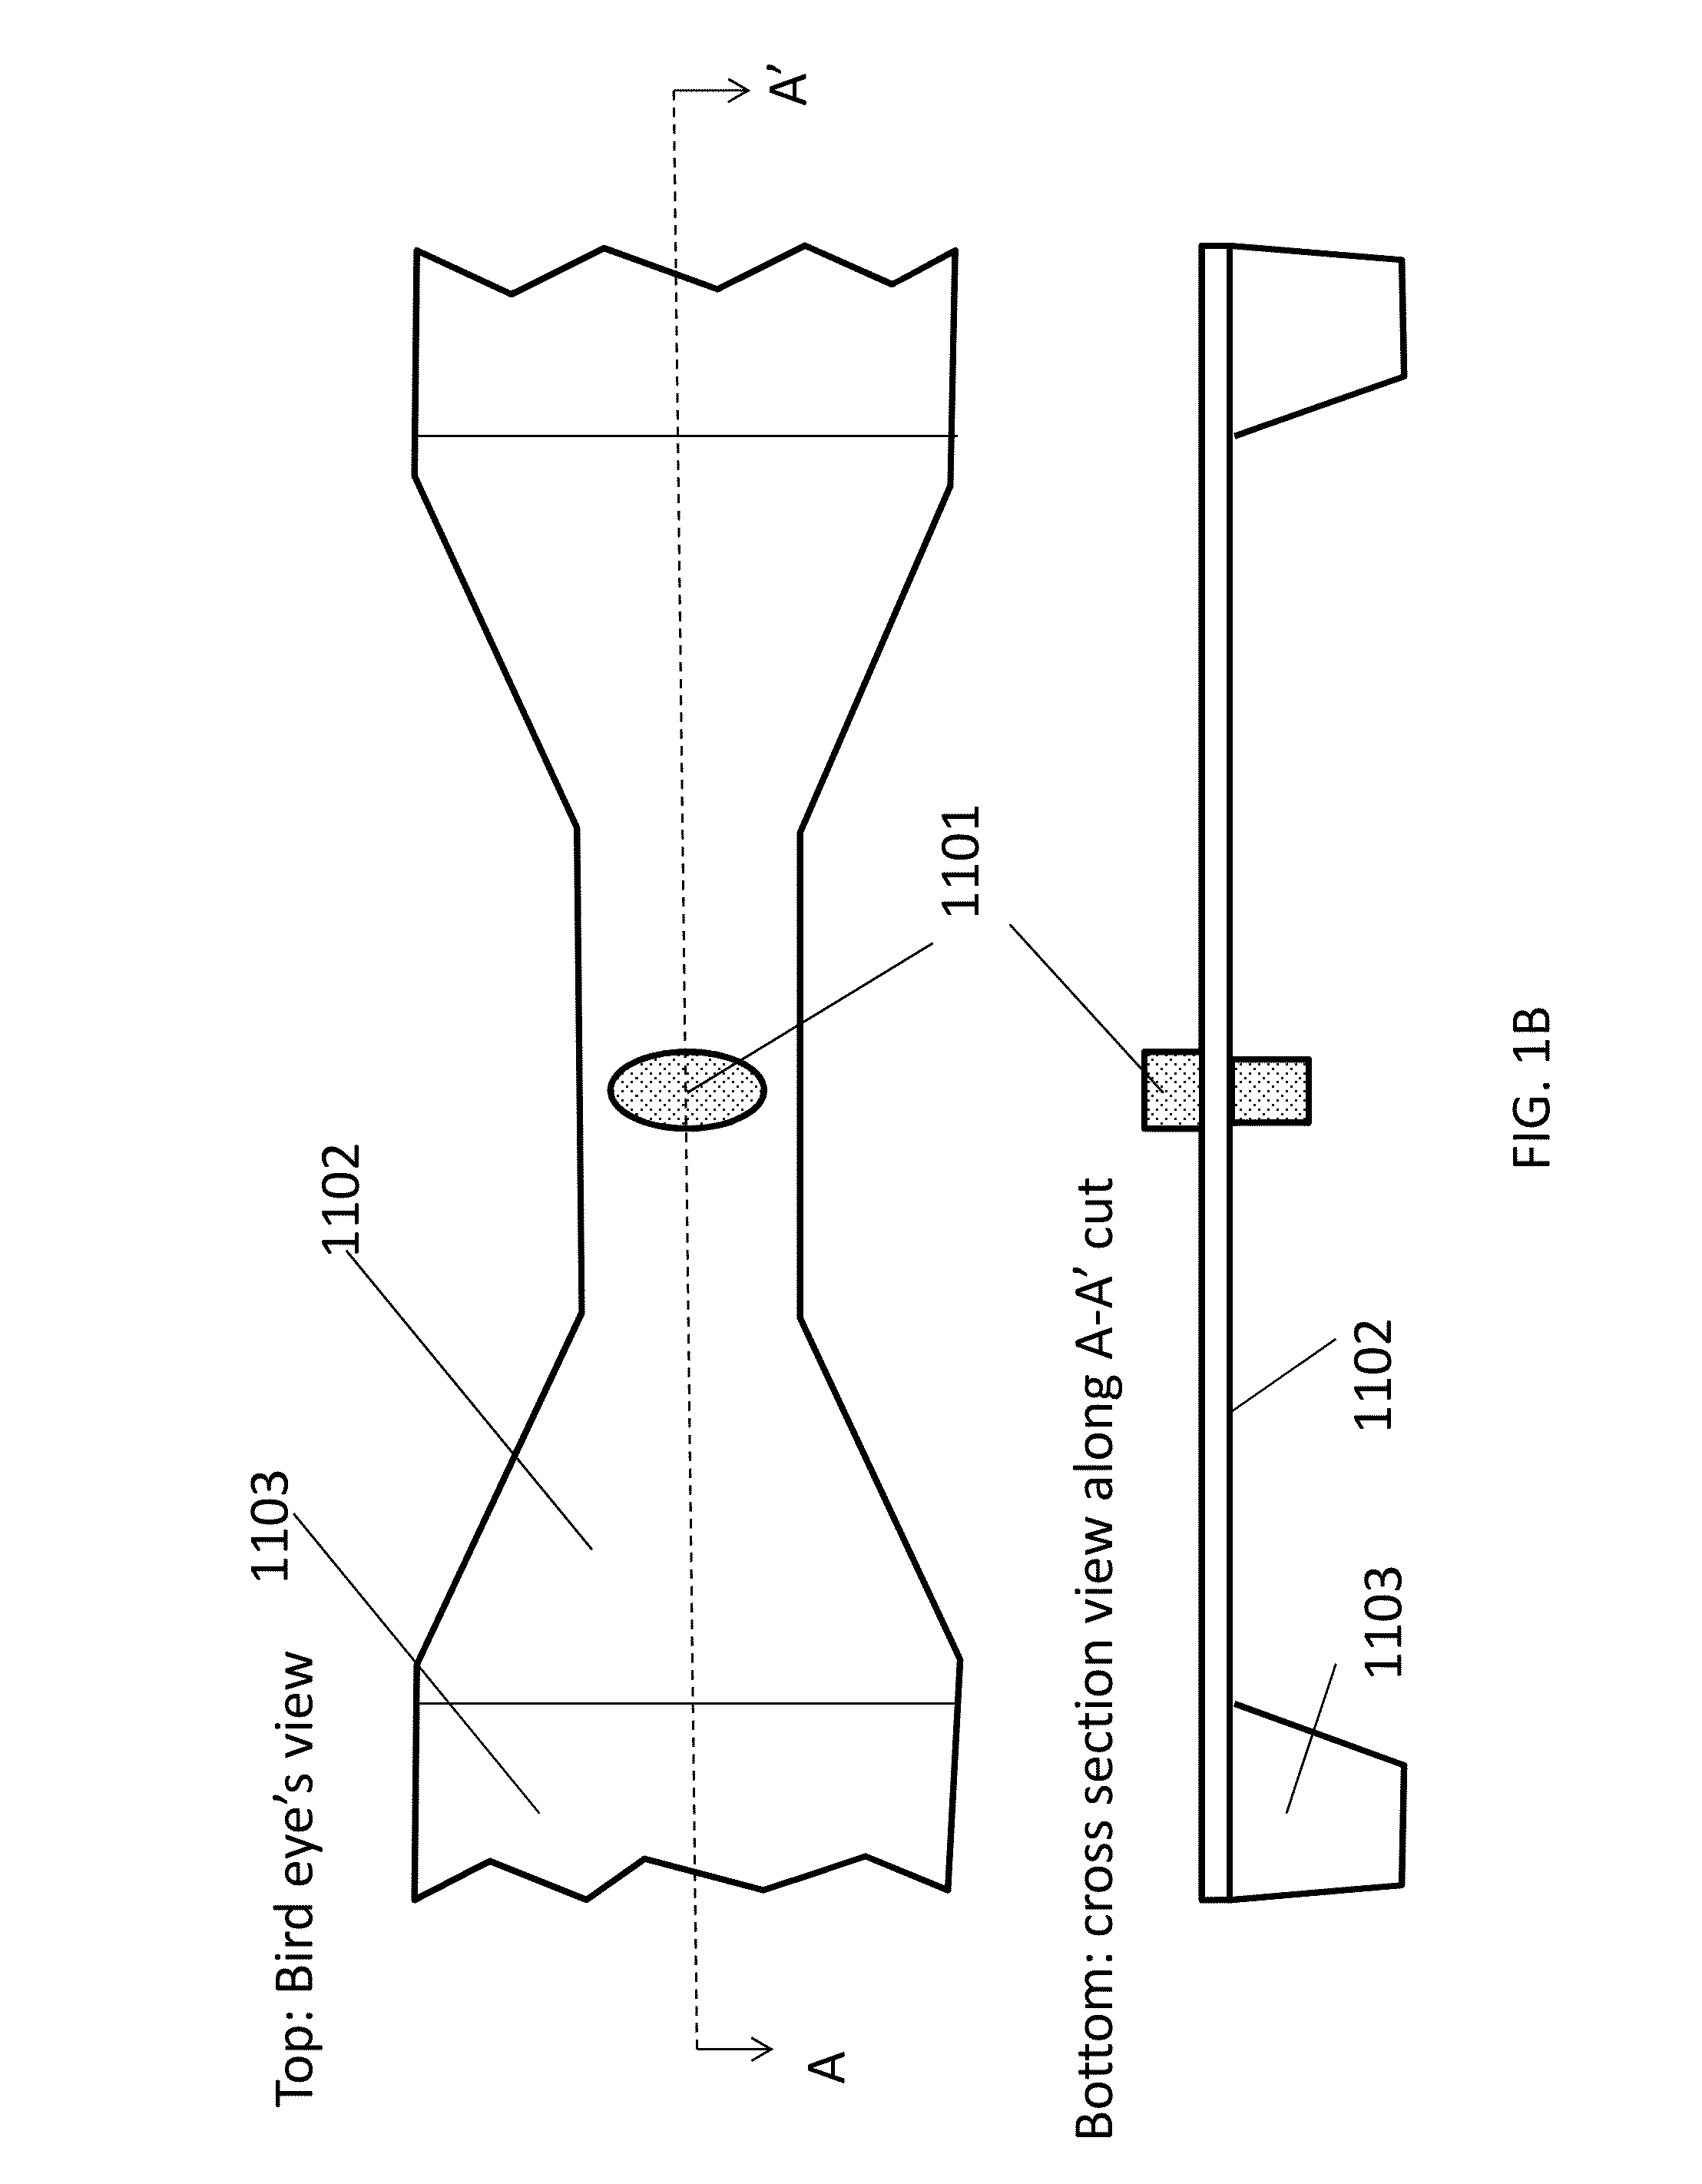 Magnetoresistive random access memory cell and 3D memory cell array